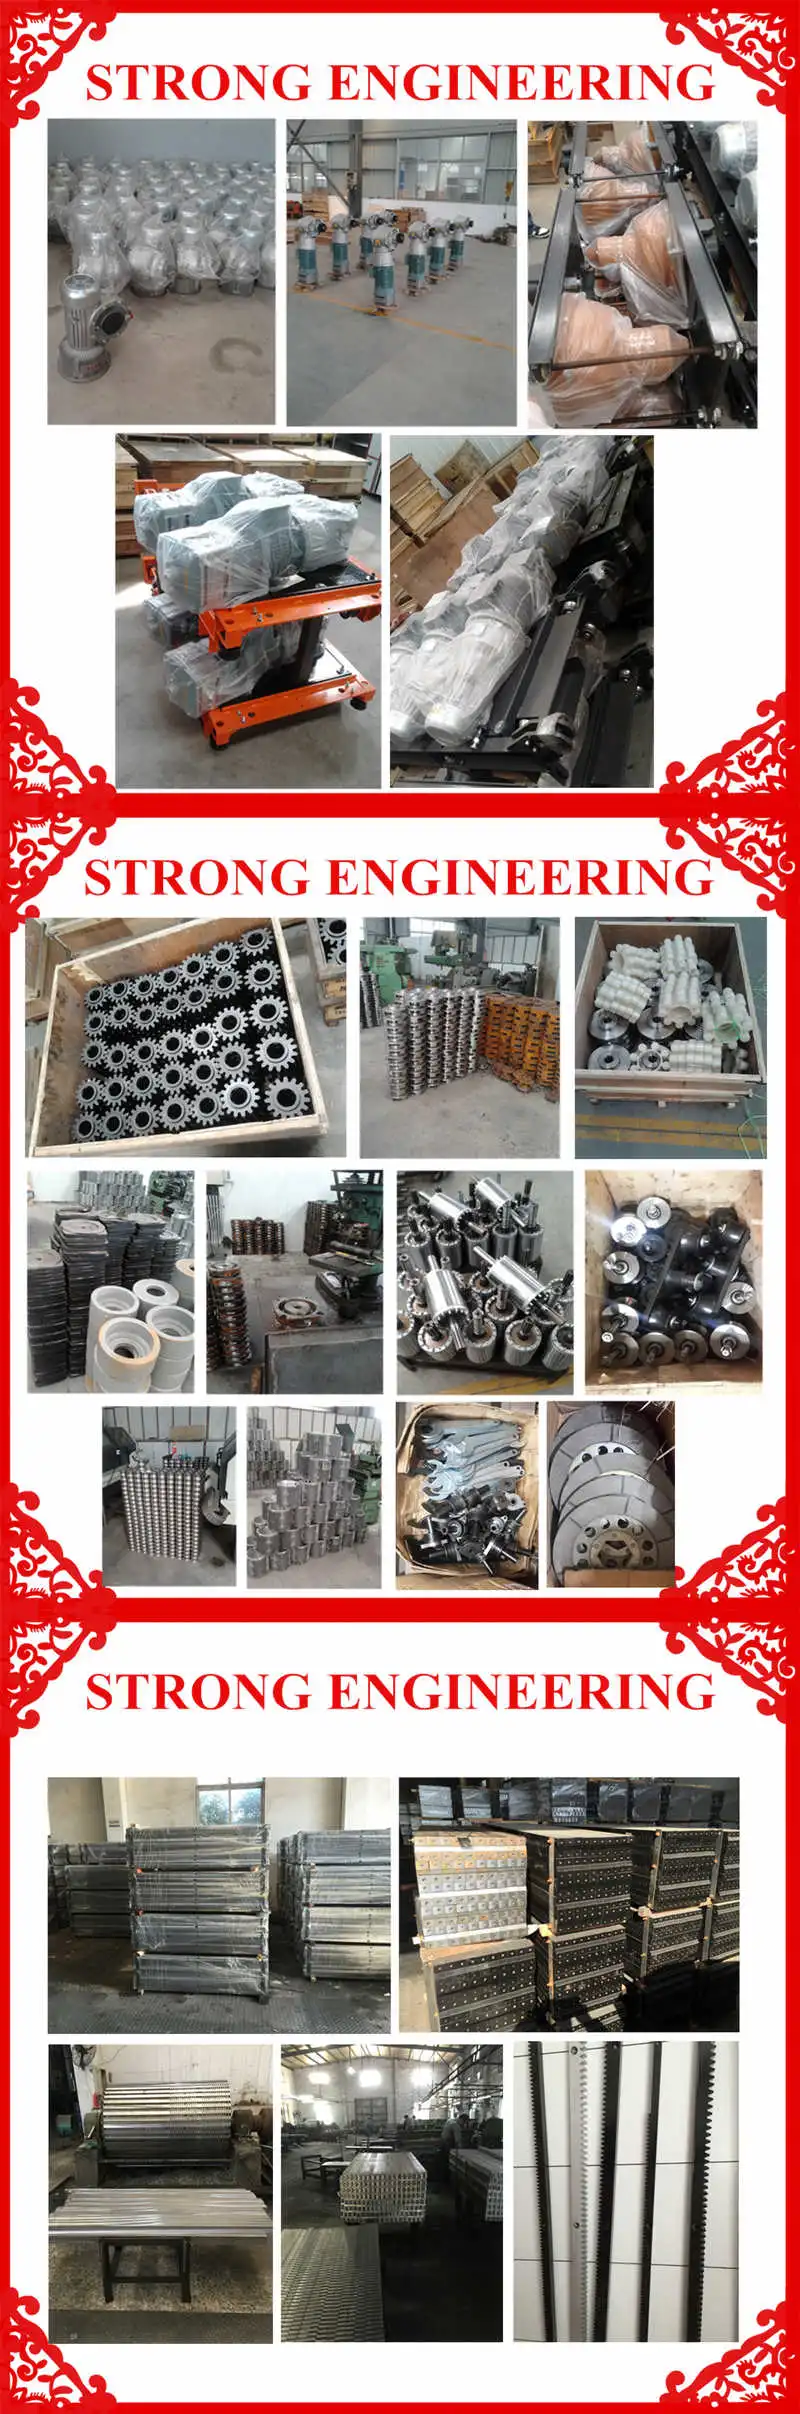 China Supplier Professional Smooth Helical Bevel Geared Speed Motor Worm Gear Gearbox Reducer 11kw 15kw 18kw